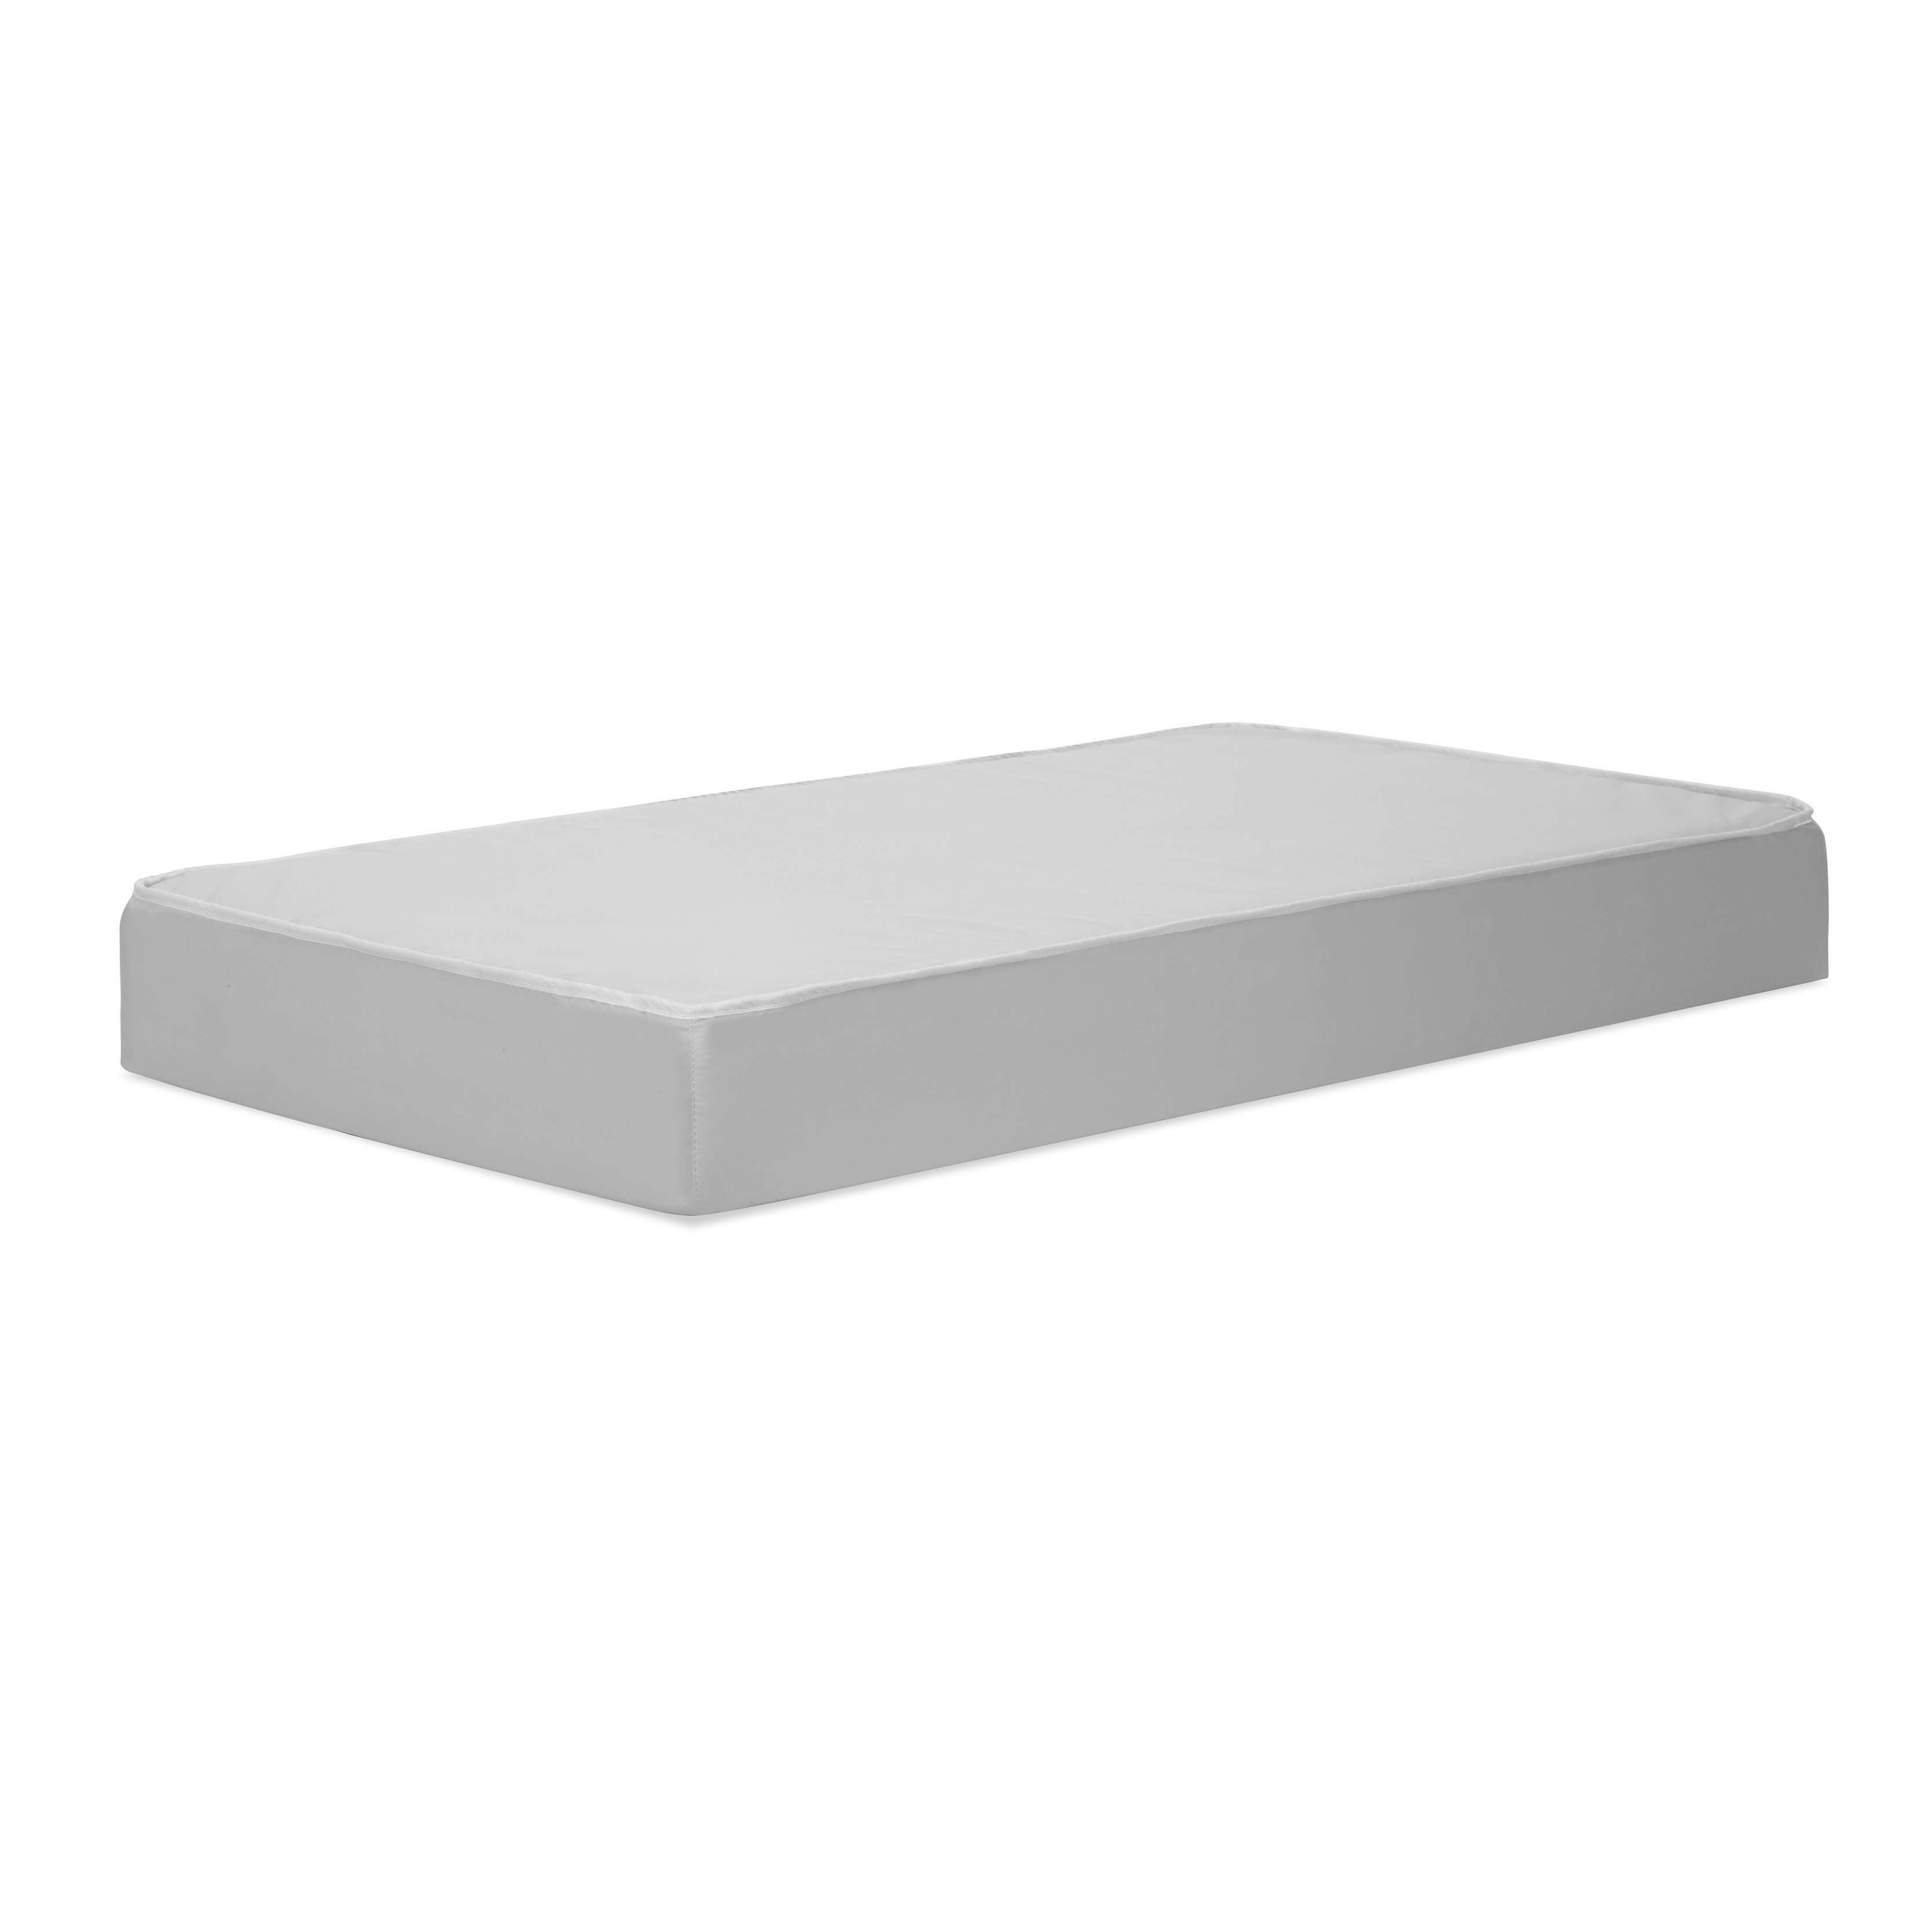 what are the measurements of a crib mattress